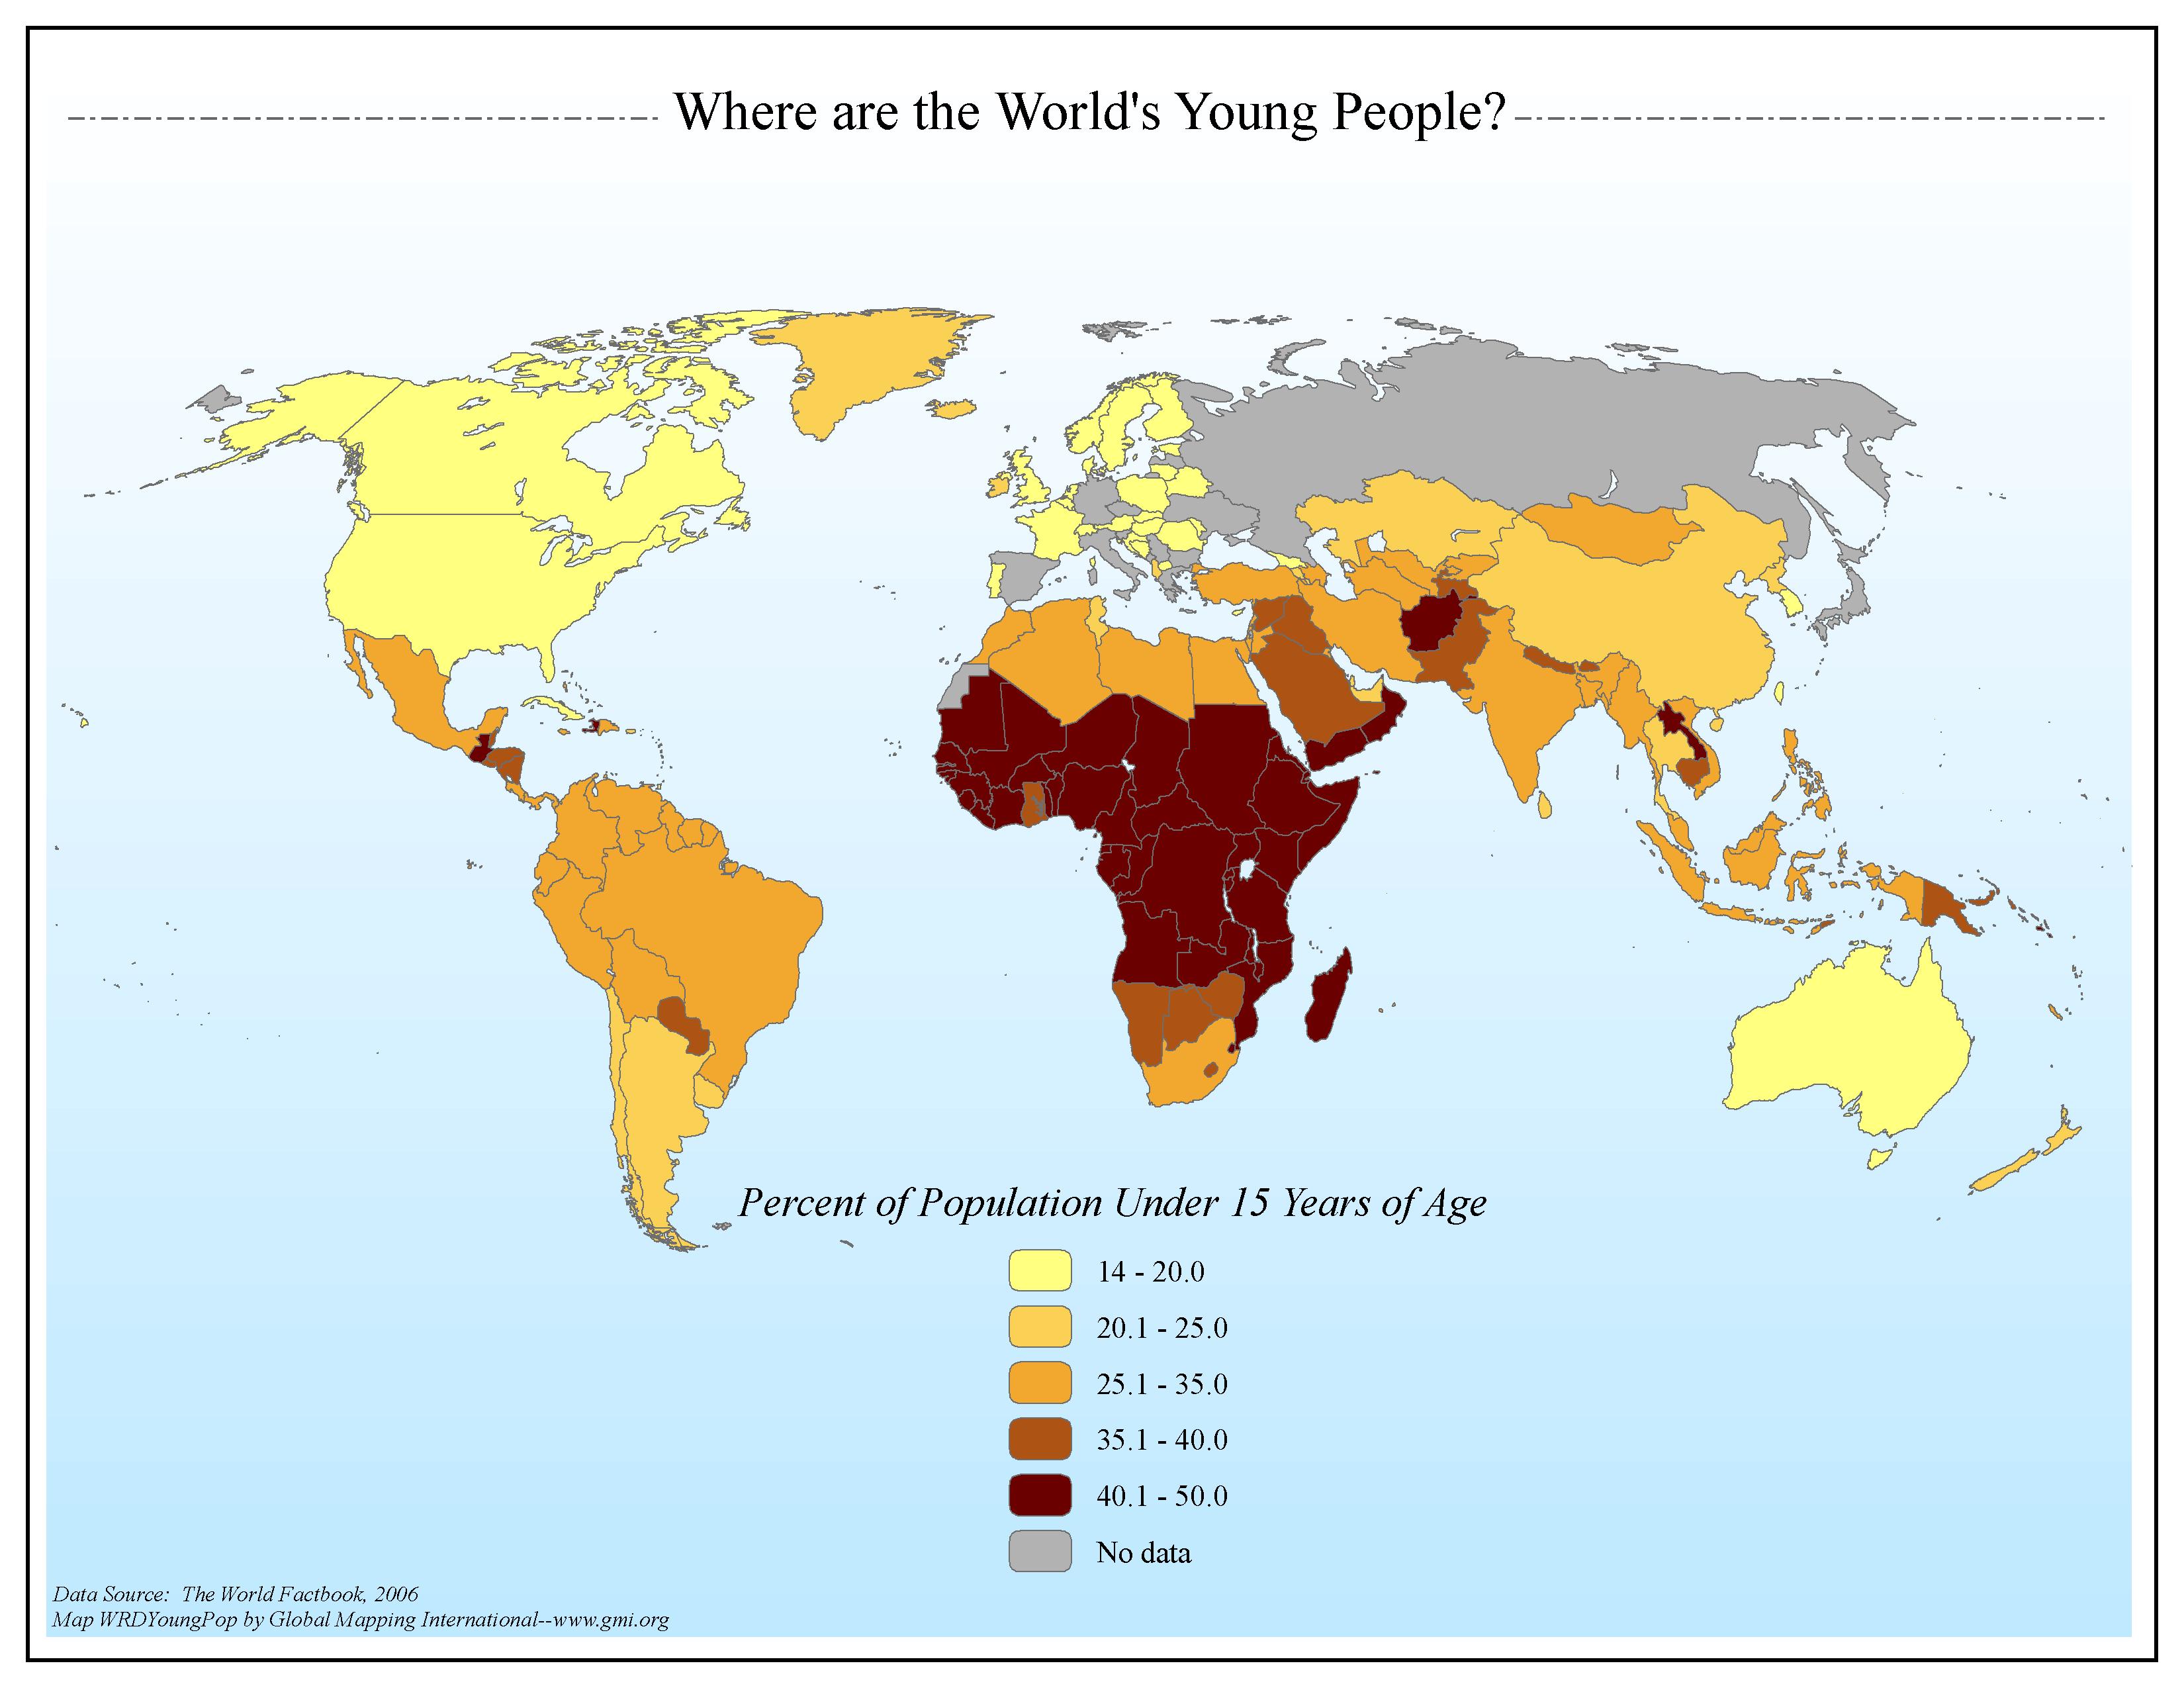 Where are the World's Young People?